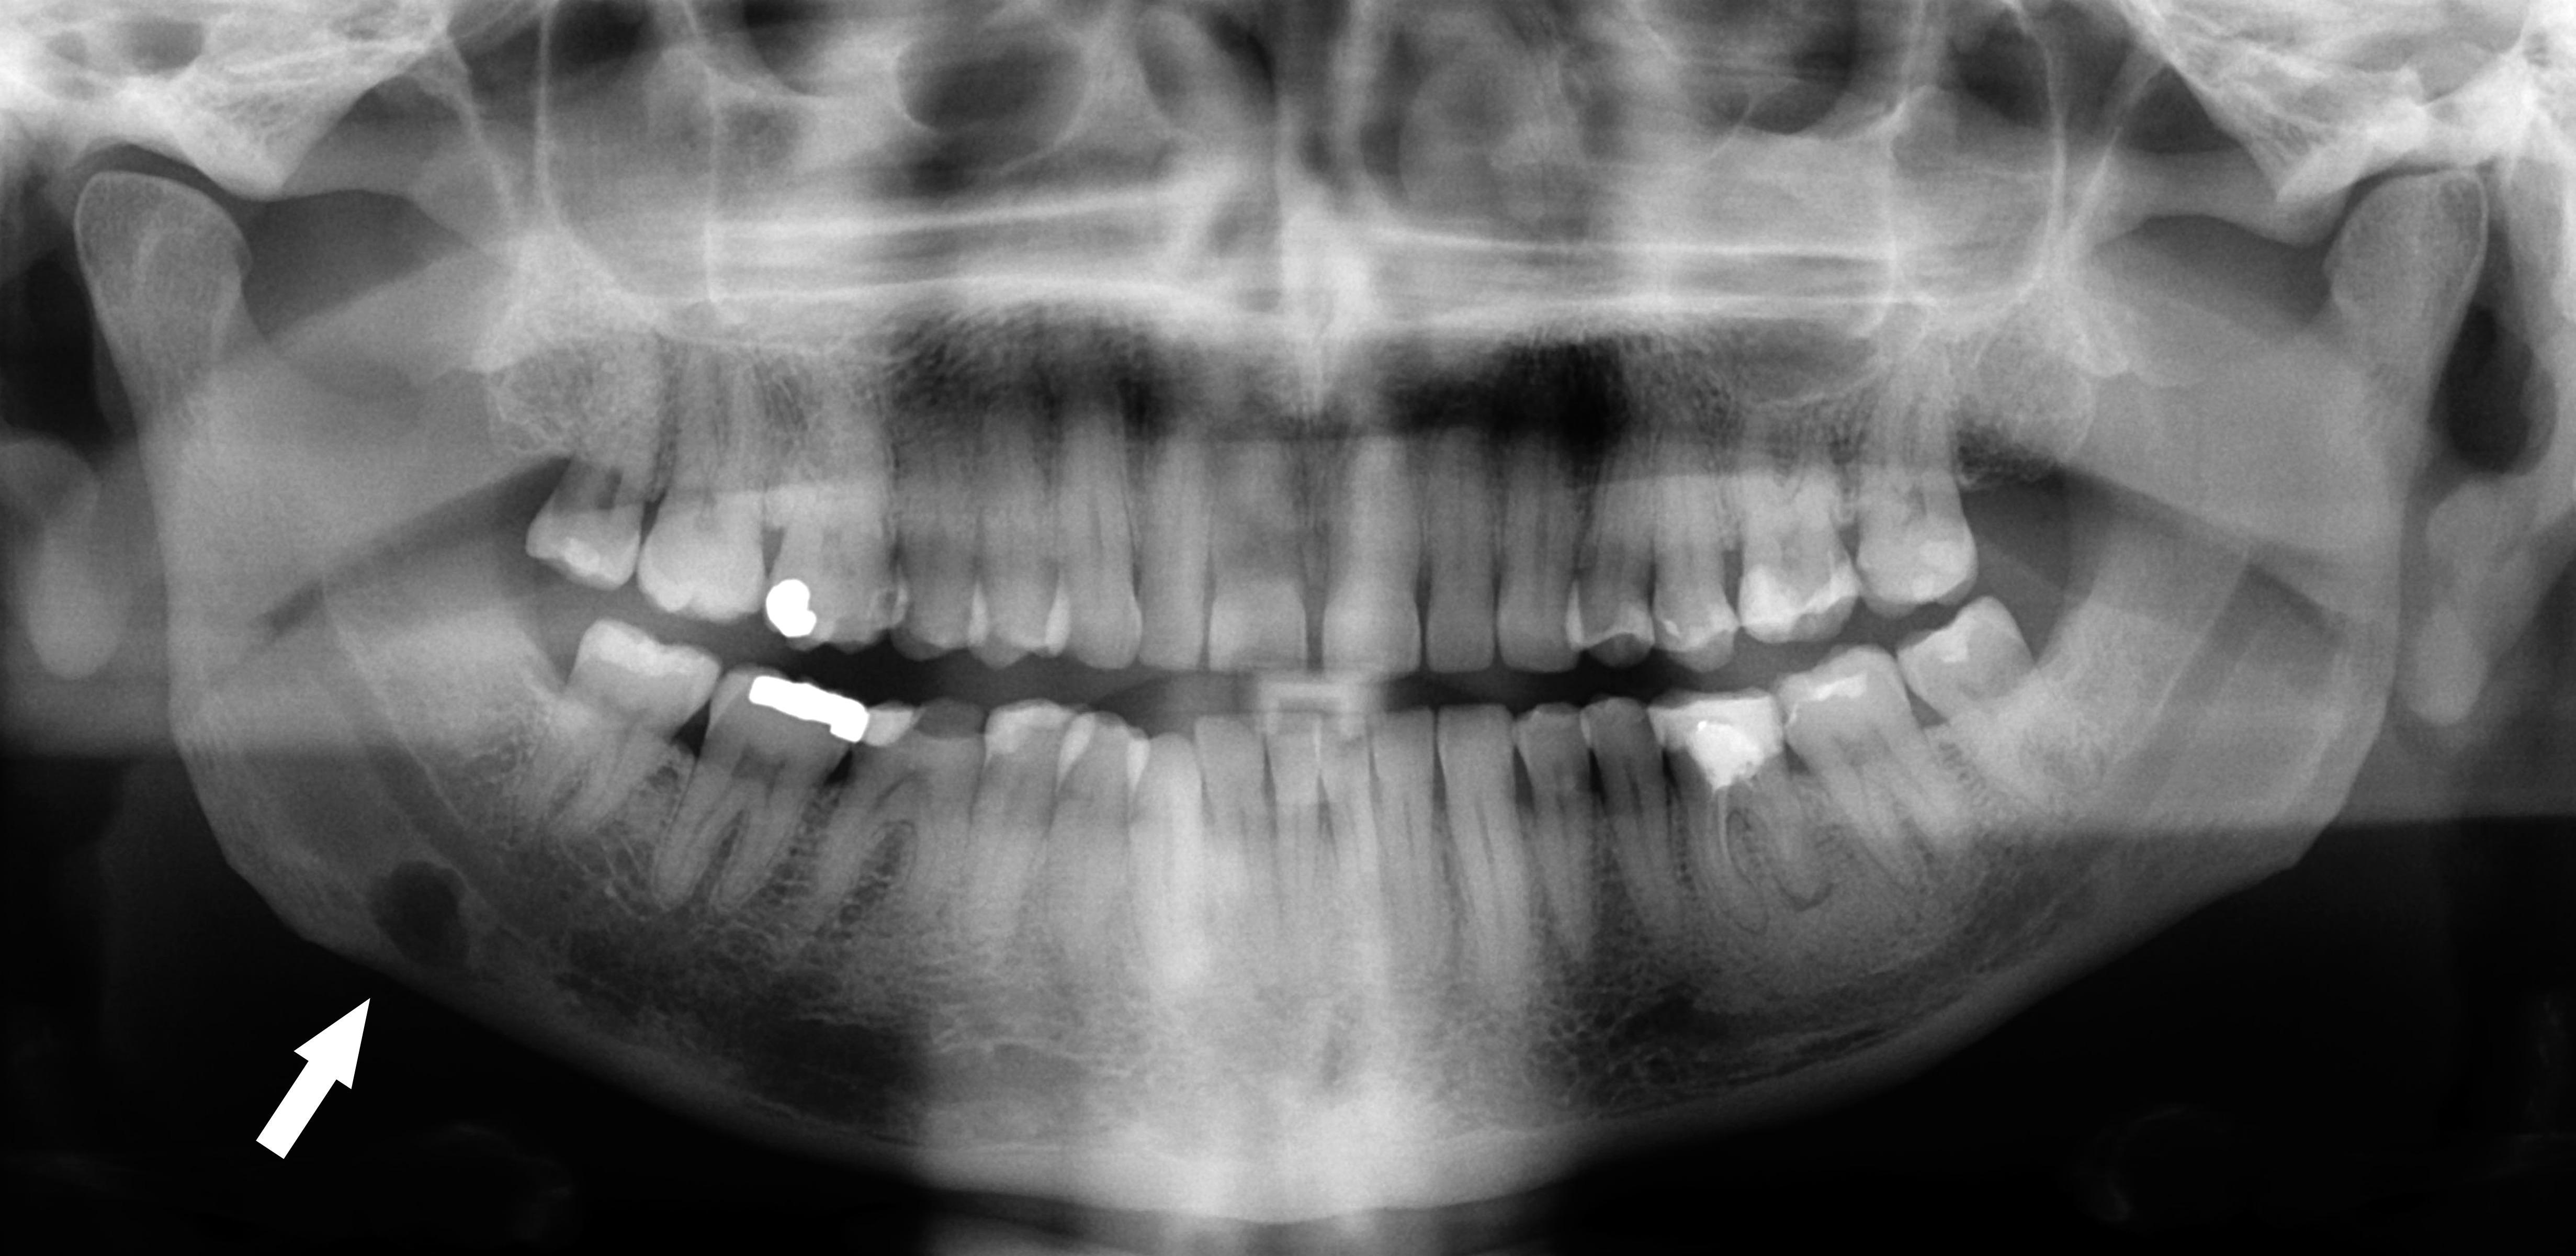 What are the benefits of a dental radiography?